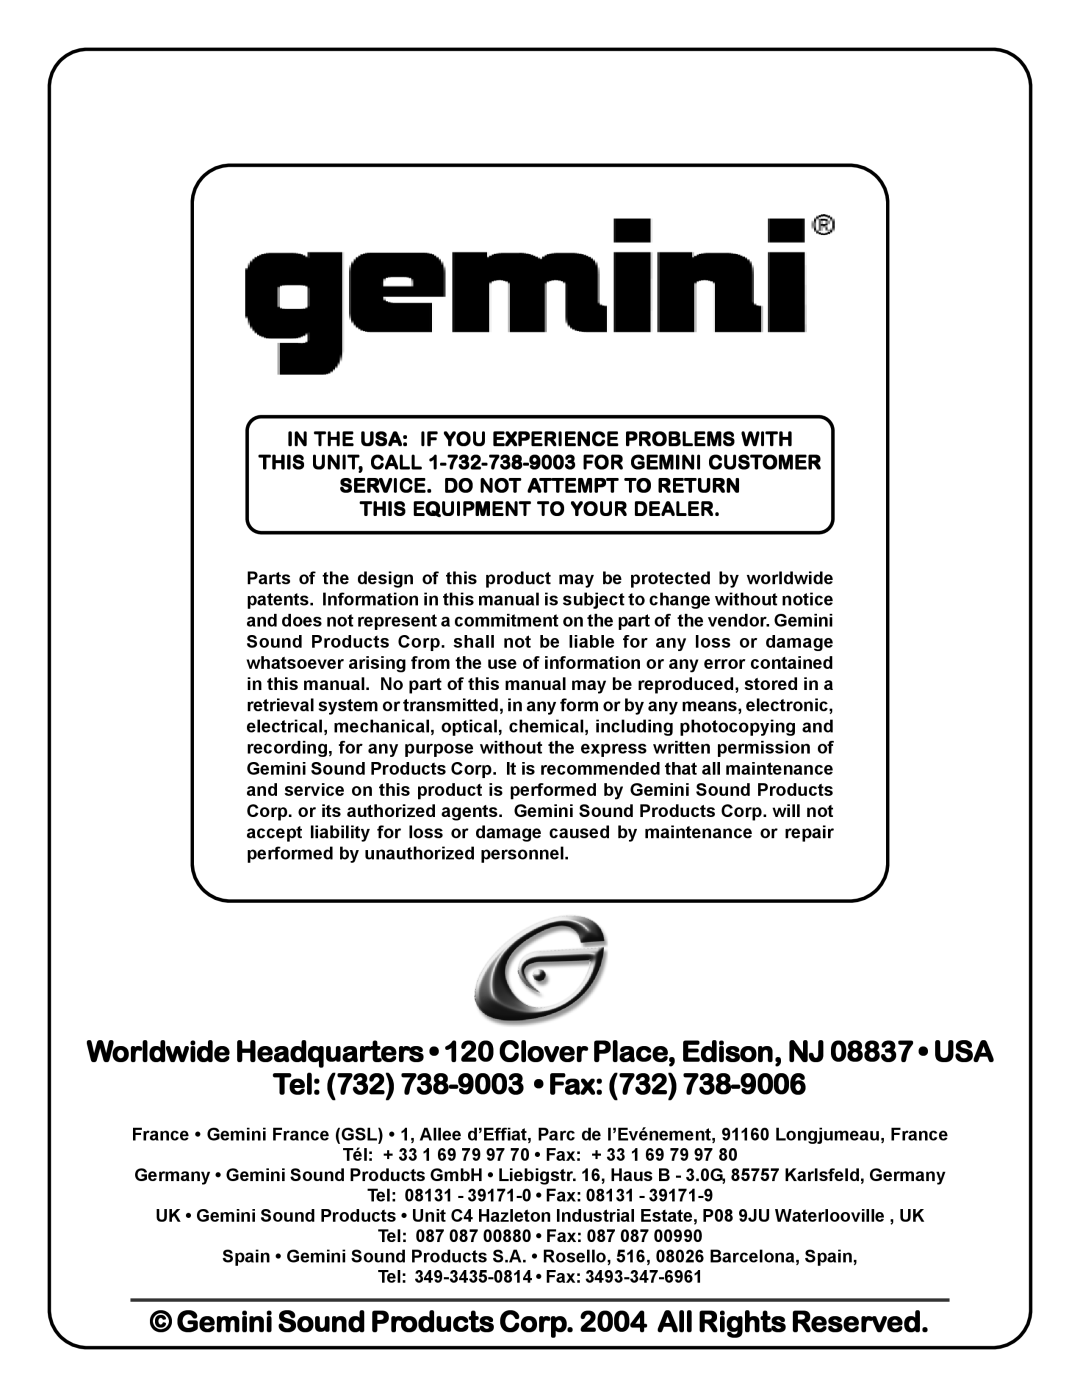 Gemini CDJ-01 manual In The Usa If You Experience Problems With, THIS UNIT, CALL 1-732-738-9003FOR GEMINI CUSTOMER 